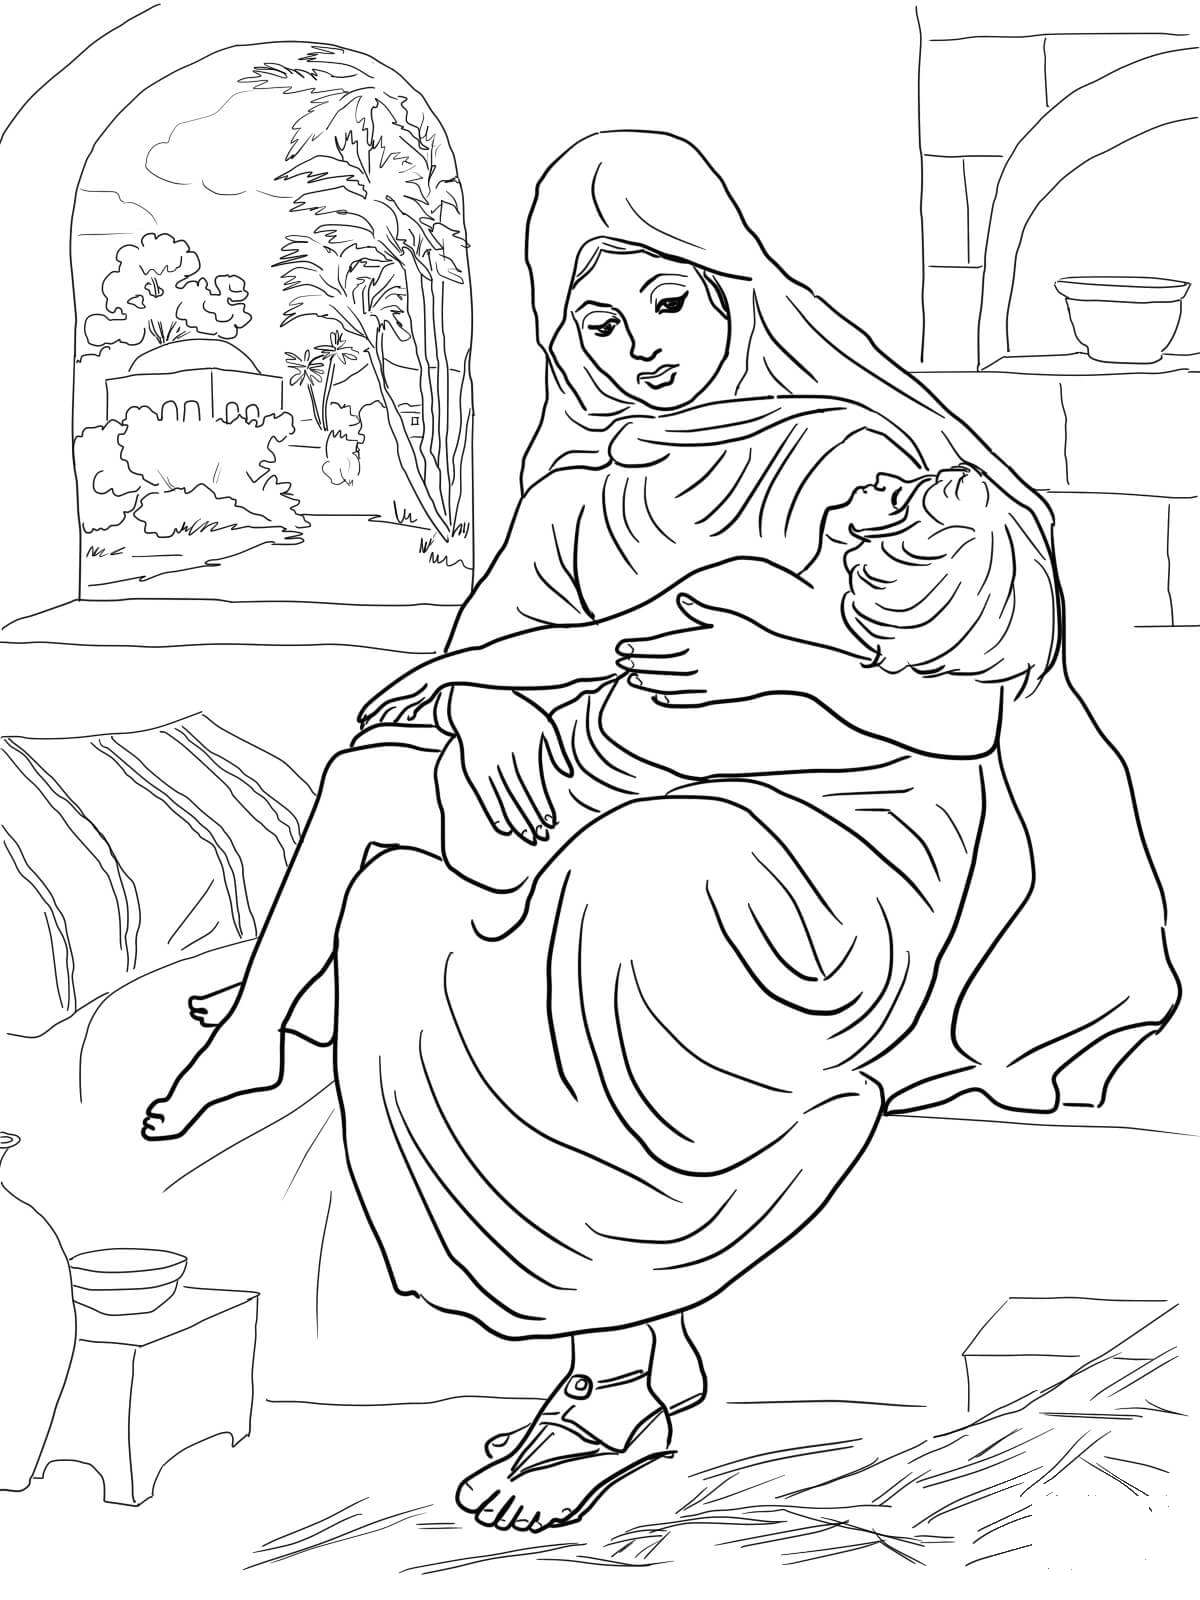 Shunammite Woman and Her Son coloring page - ColouringPages